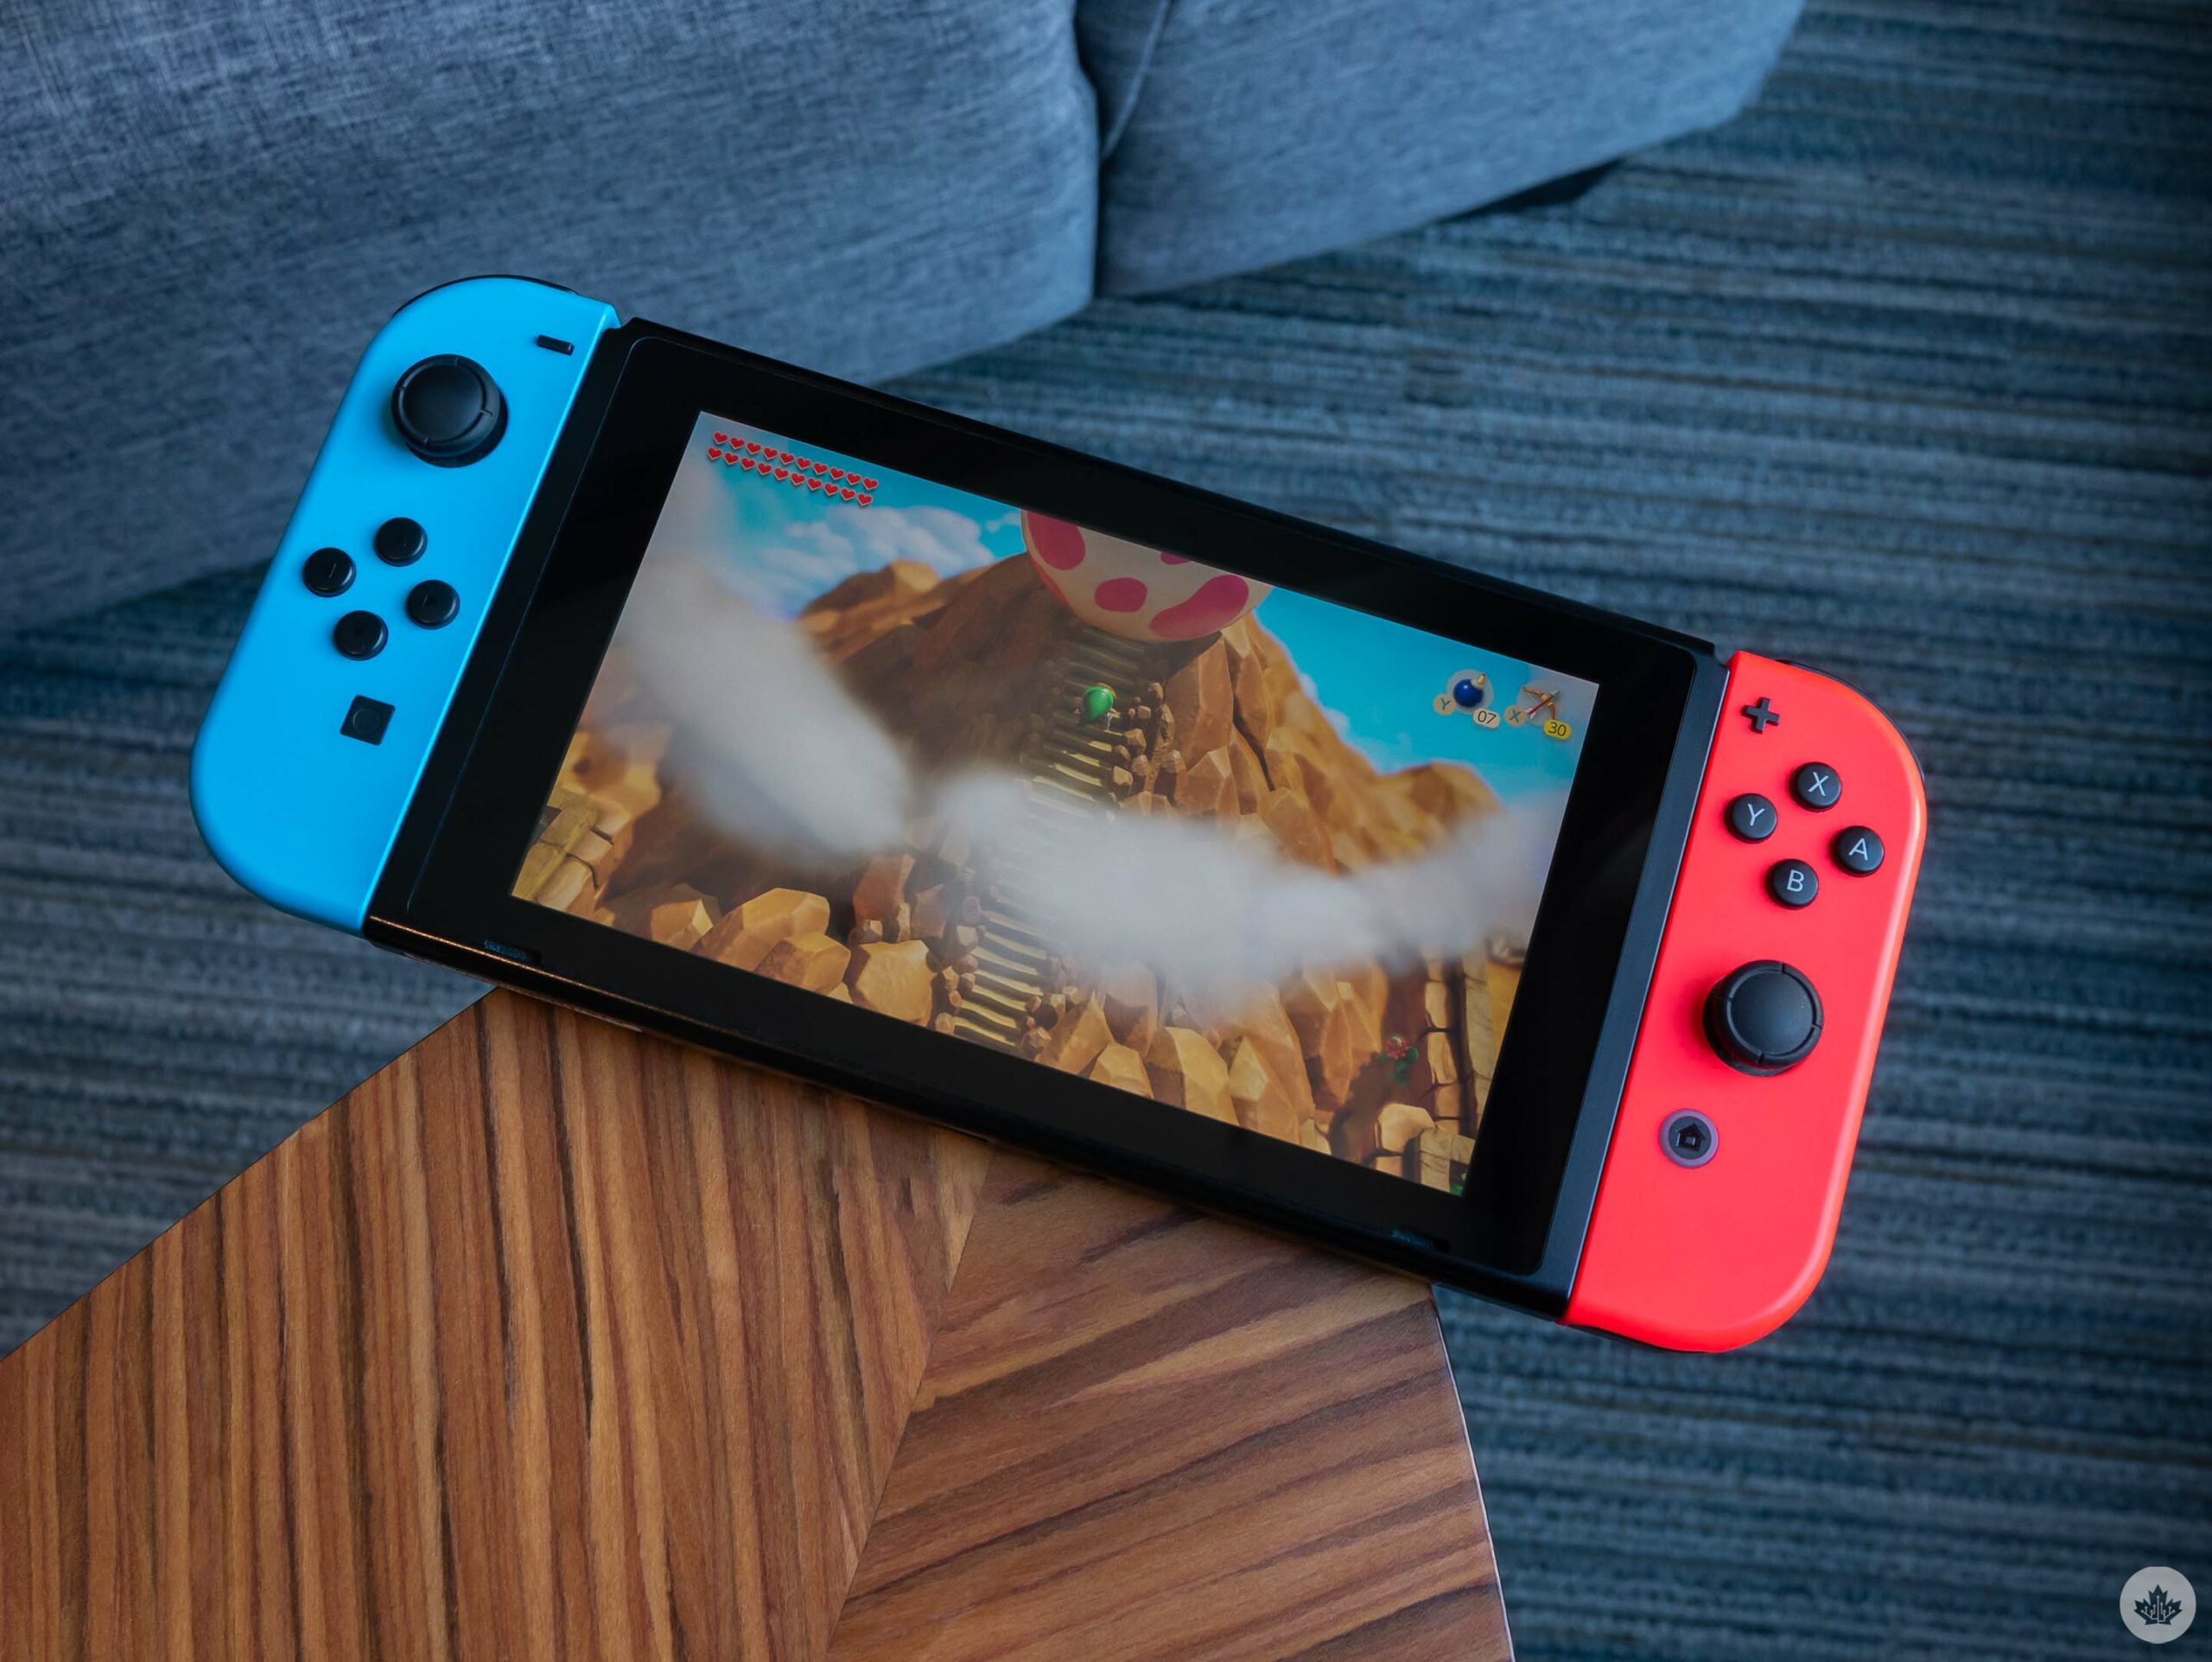 Switch red and blue Joy-Cons